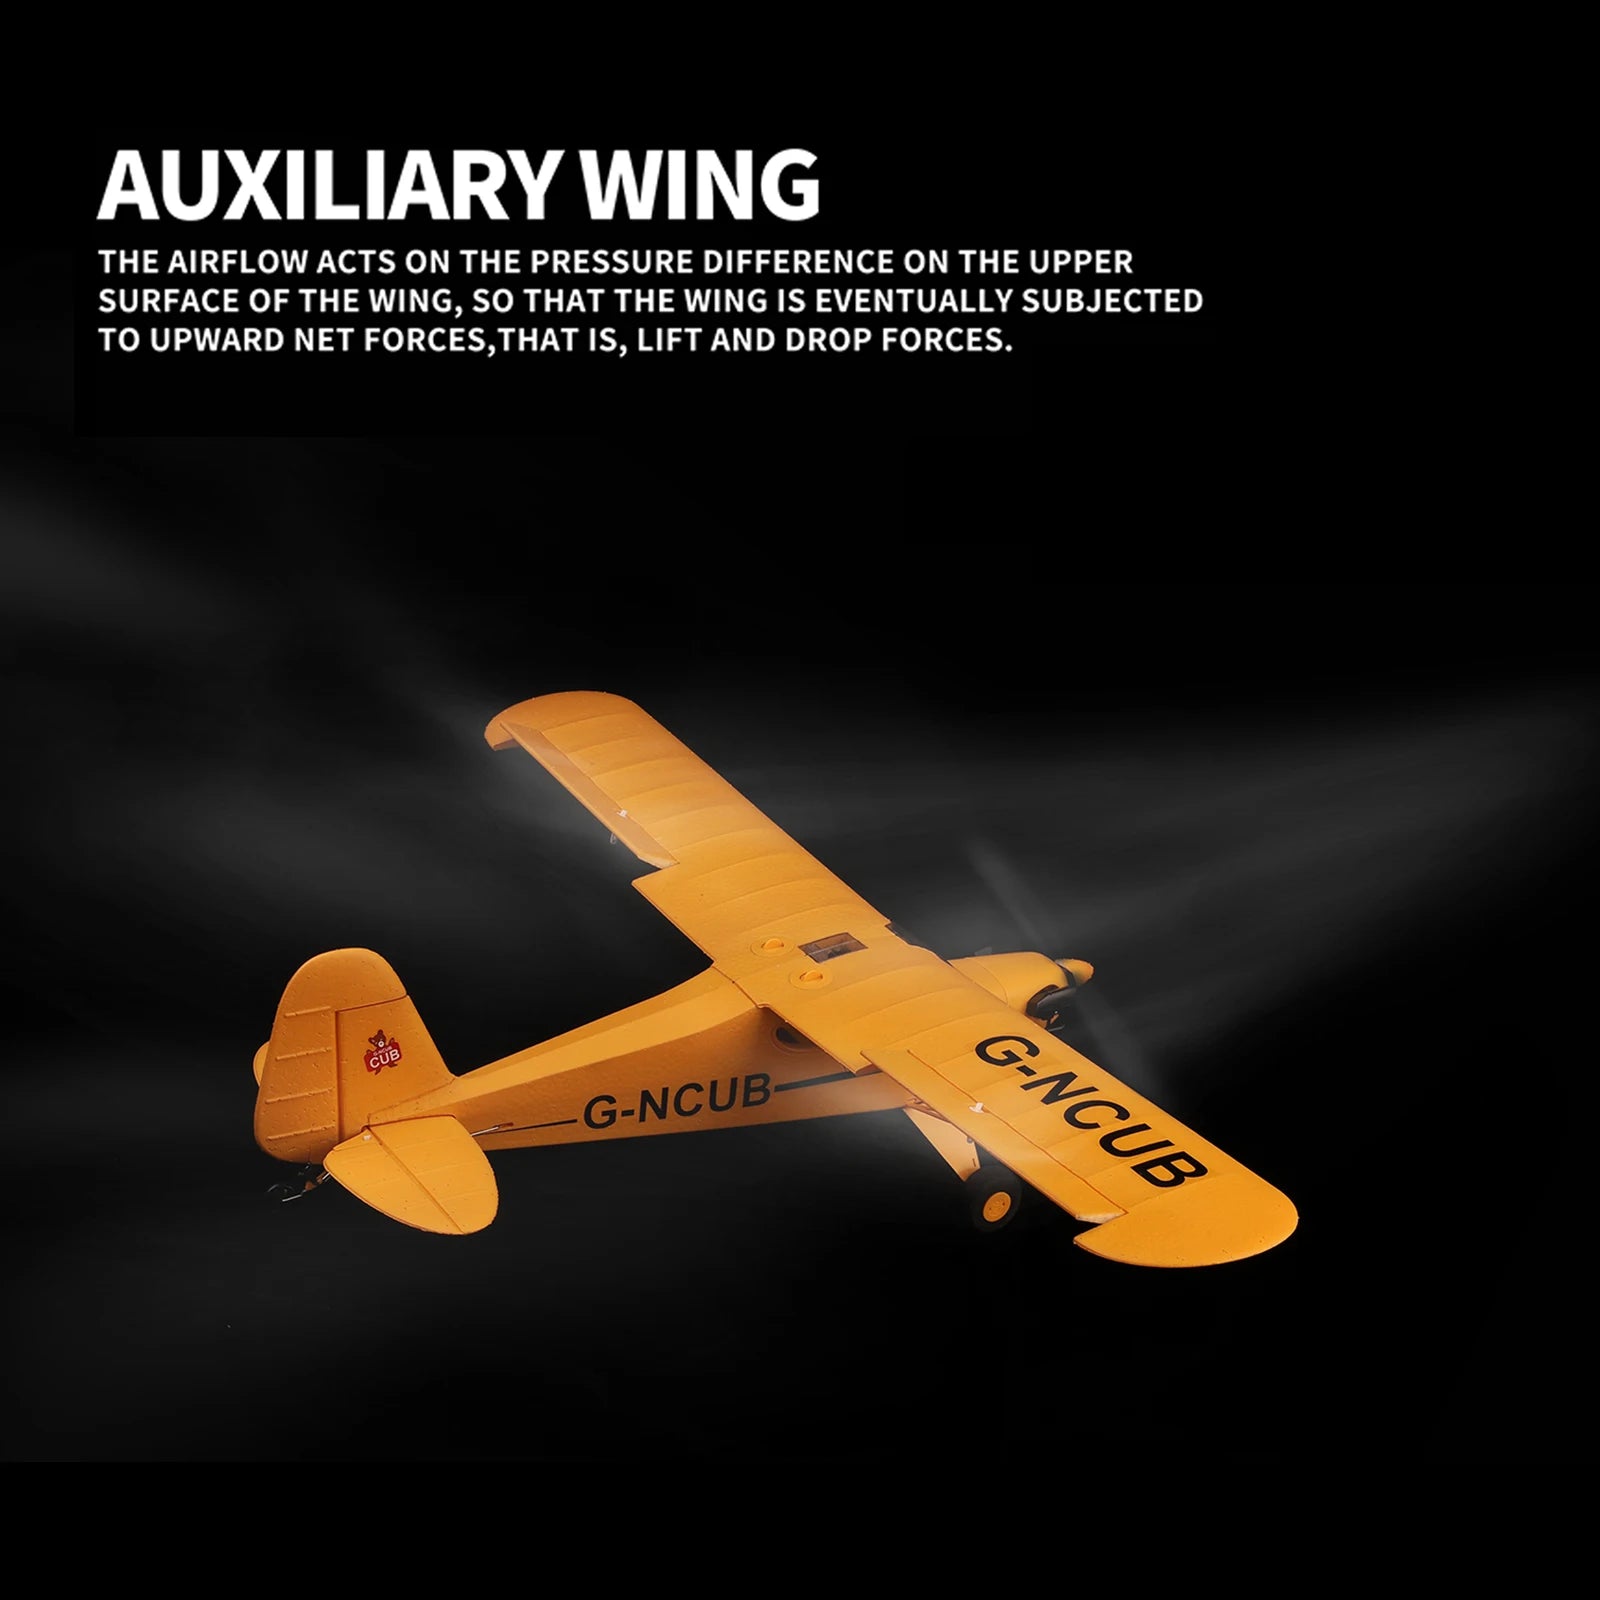 A160 RC Airplane, AUXILIARY WING THE AIRFLOW ACTS ON THE 